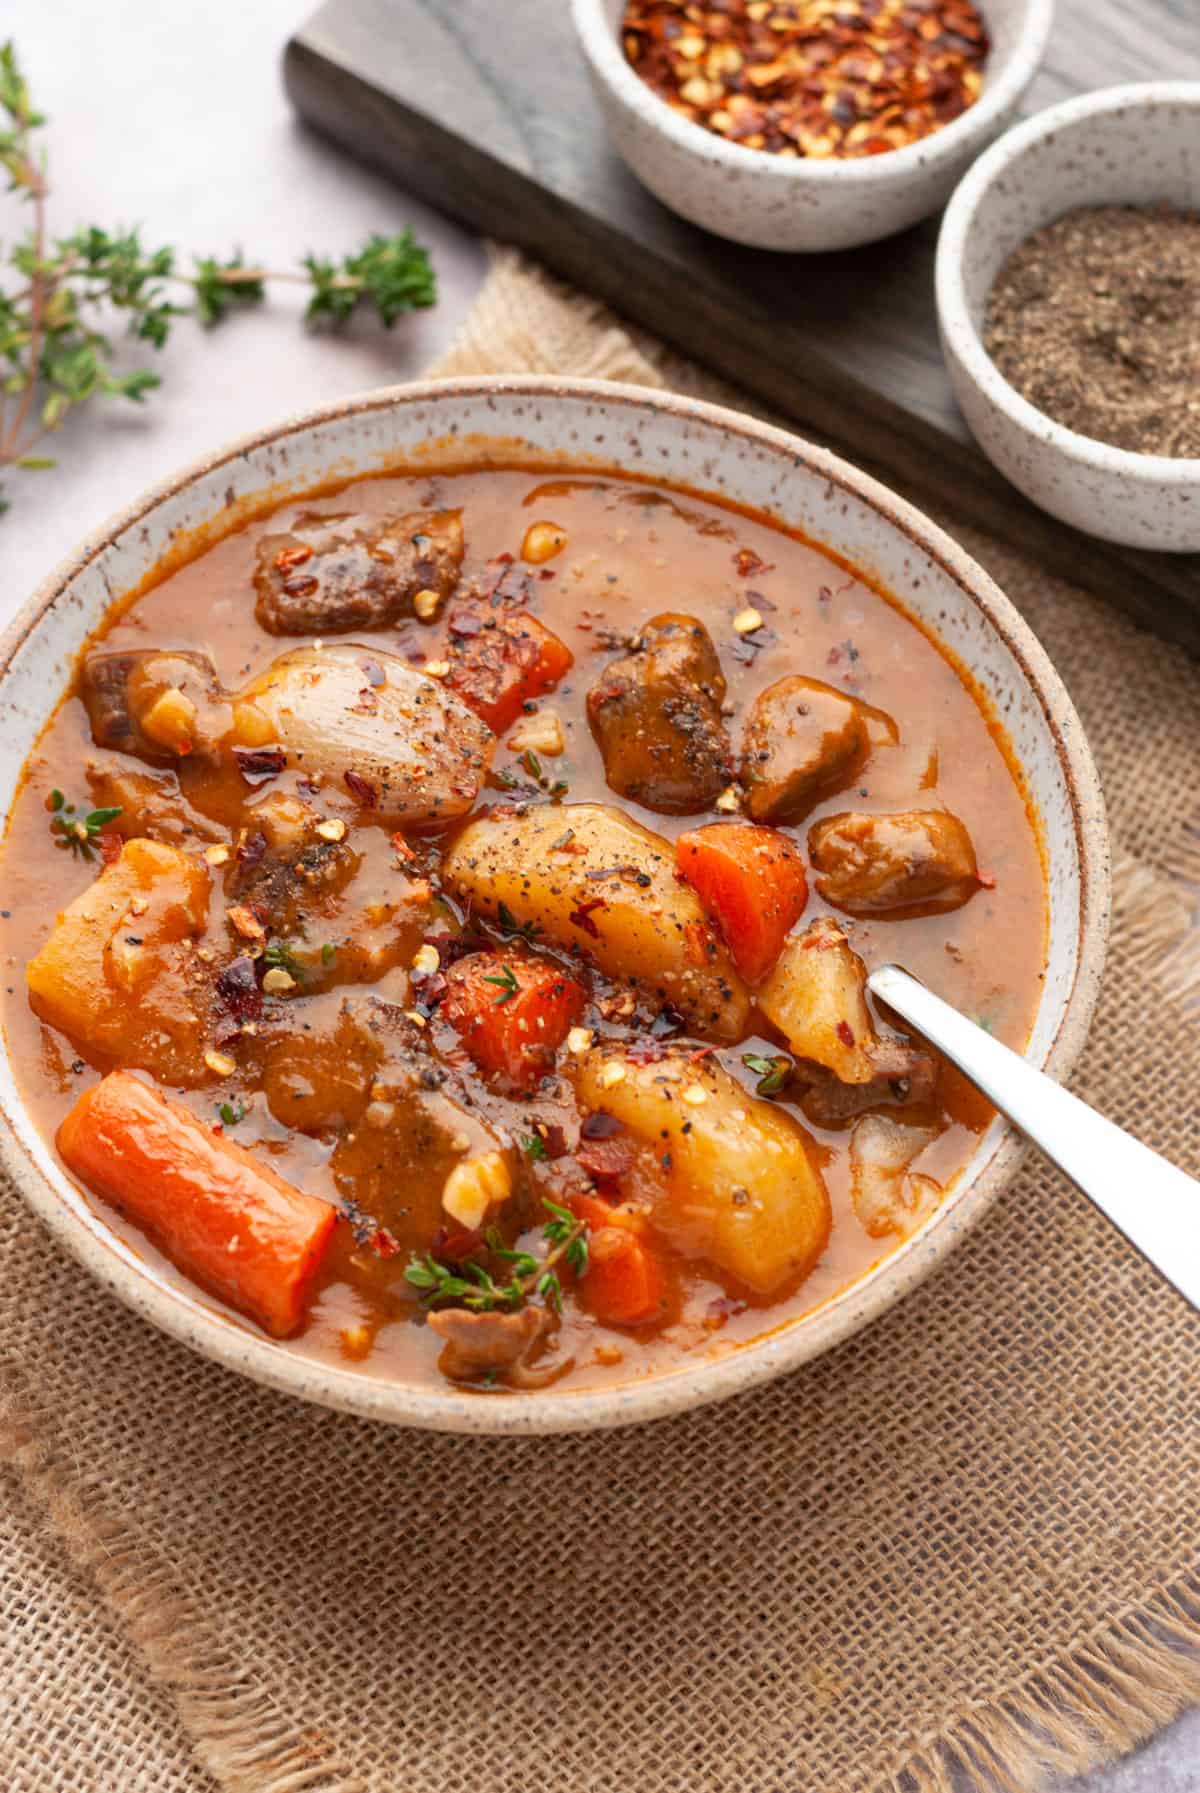 Spicy Beef Stew Recipe Without Wine (instant Pot)